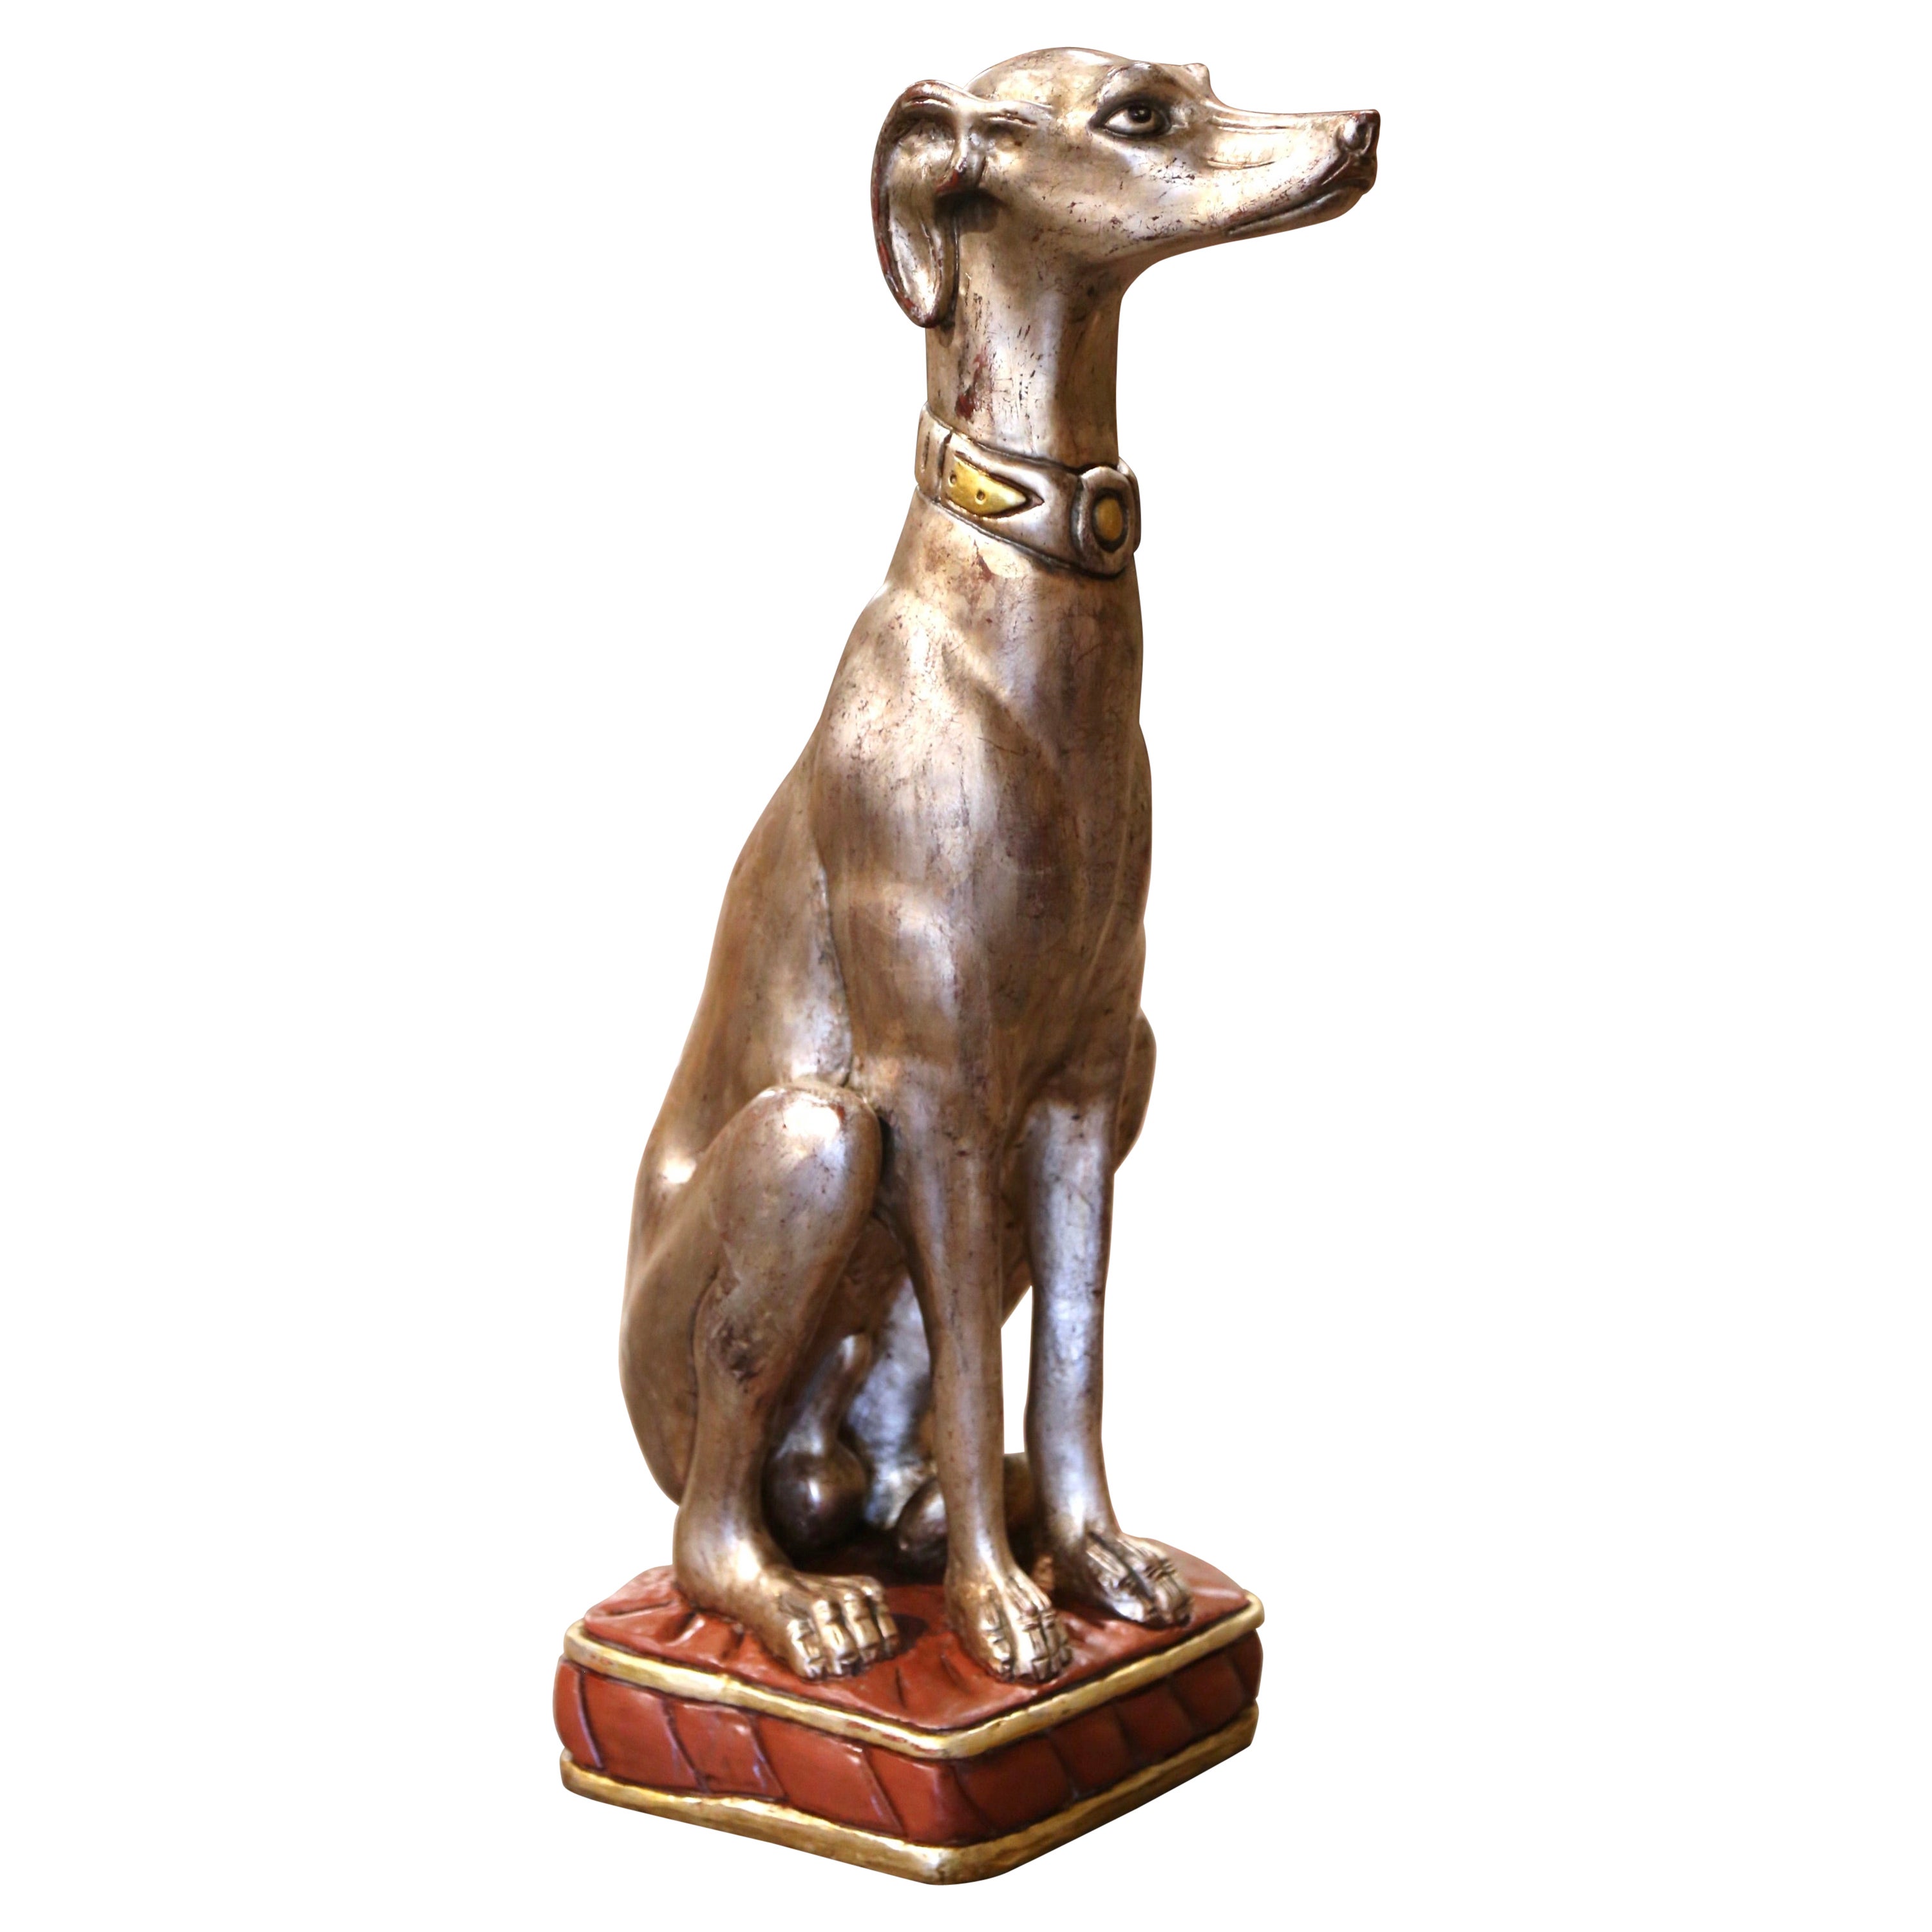 Vintage Italian Carved Wooden and Silvered Greyhound Dog Sculpture For Sale